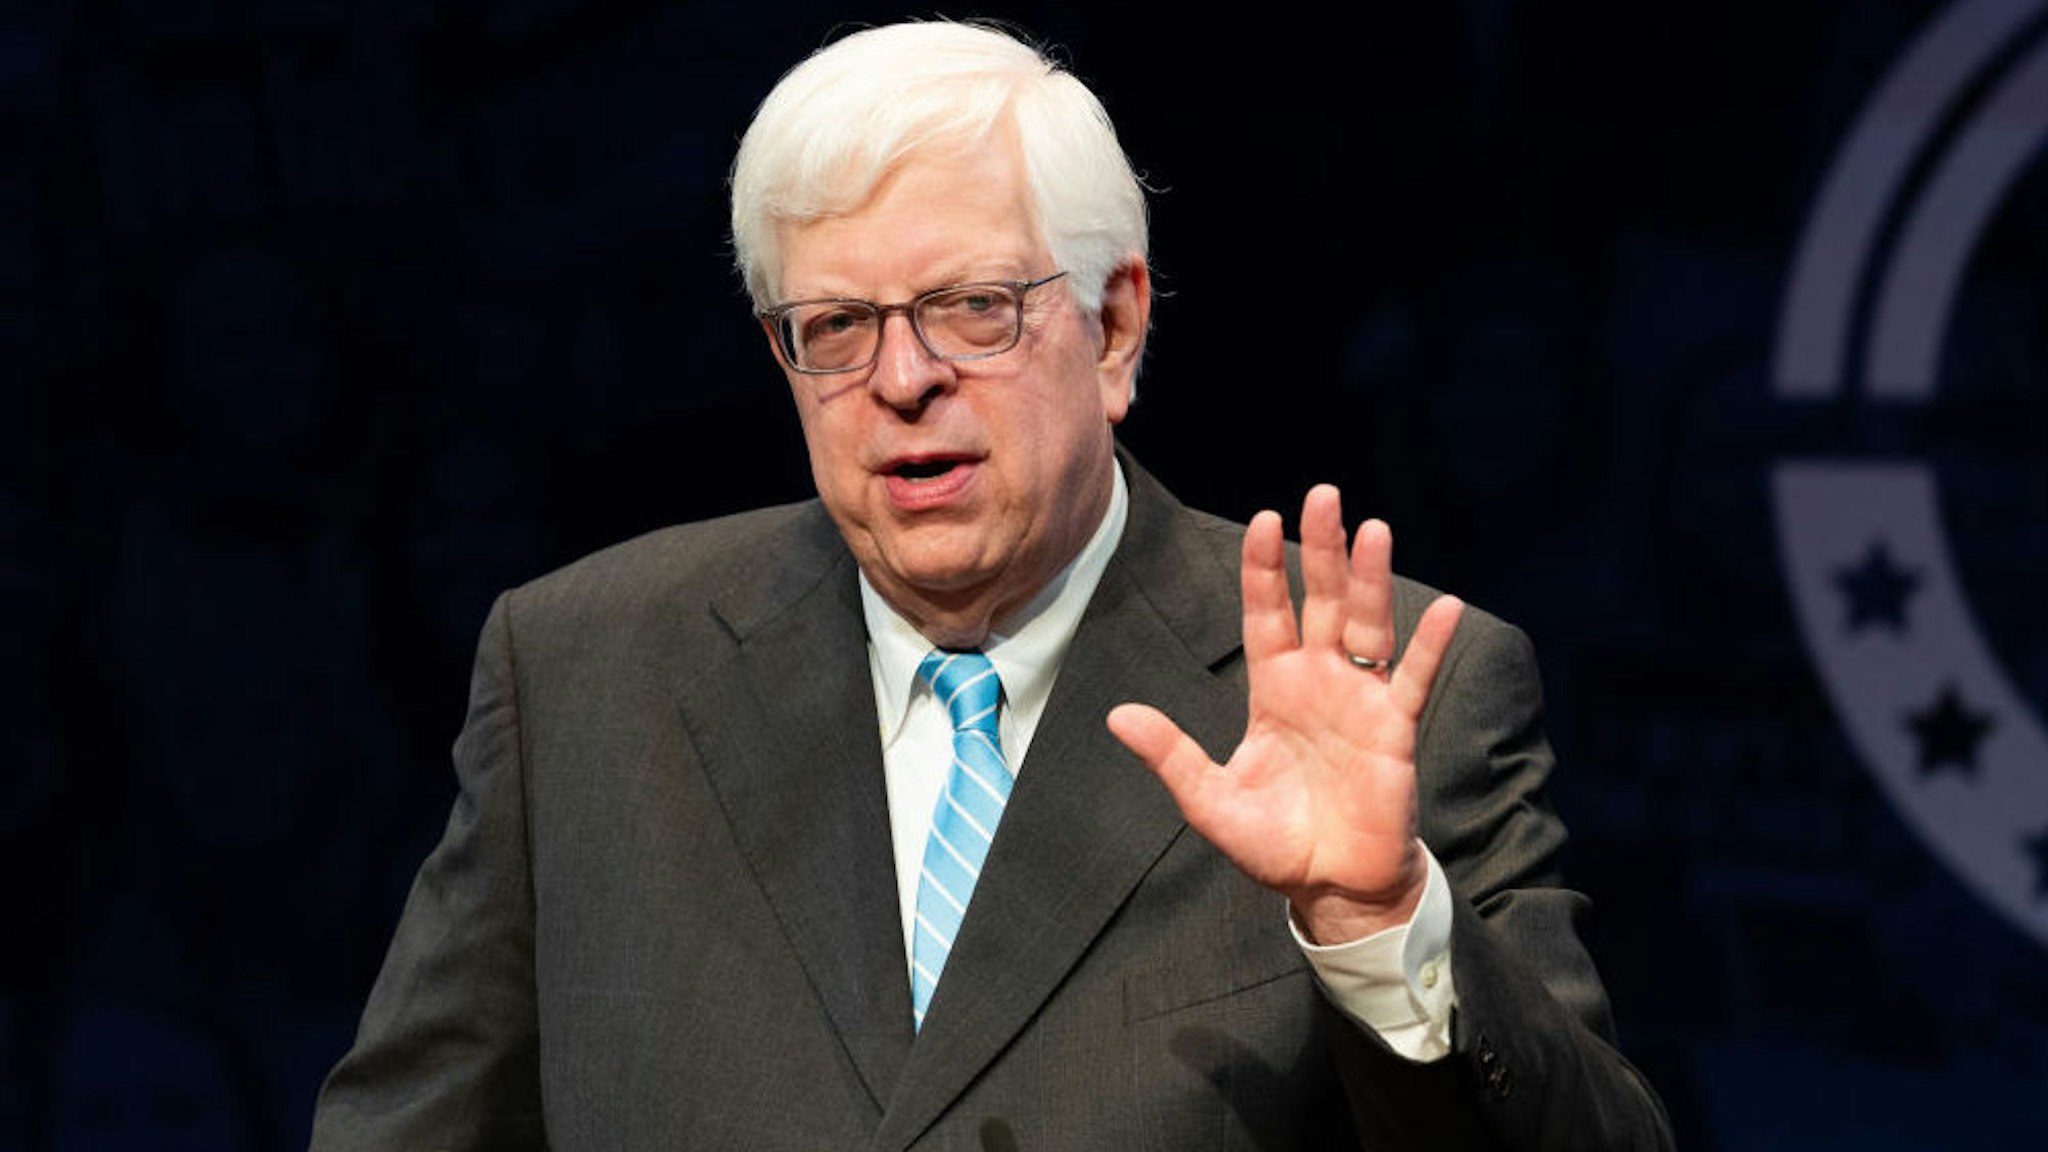 Dennis Prager, nationally syndicated conservative radio talk show host and writer, speaking at the Turning Point High School Leadership Summit in Washington, DC.